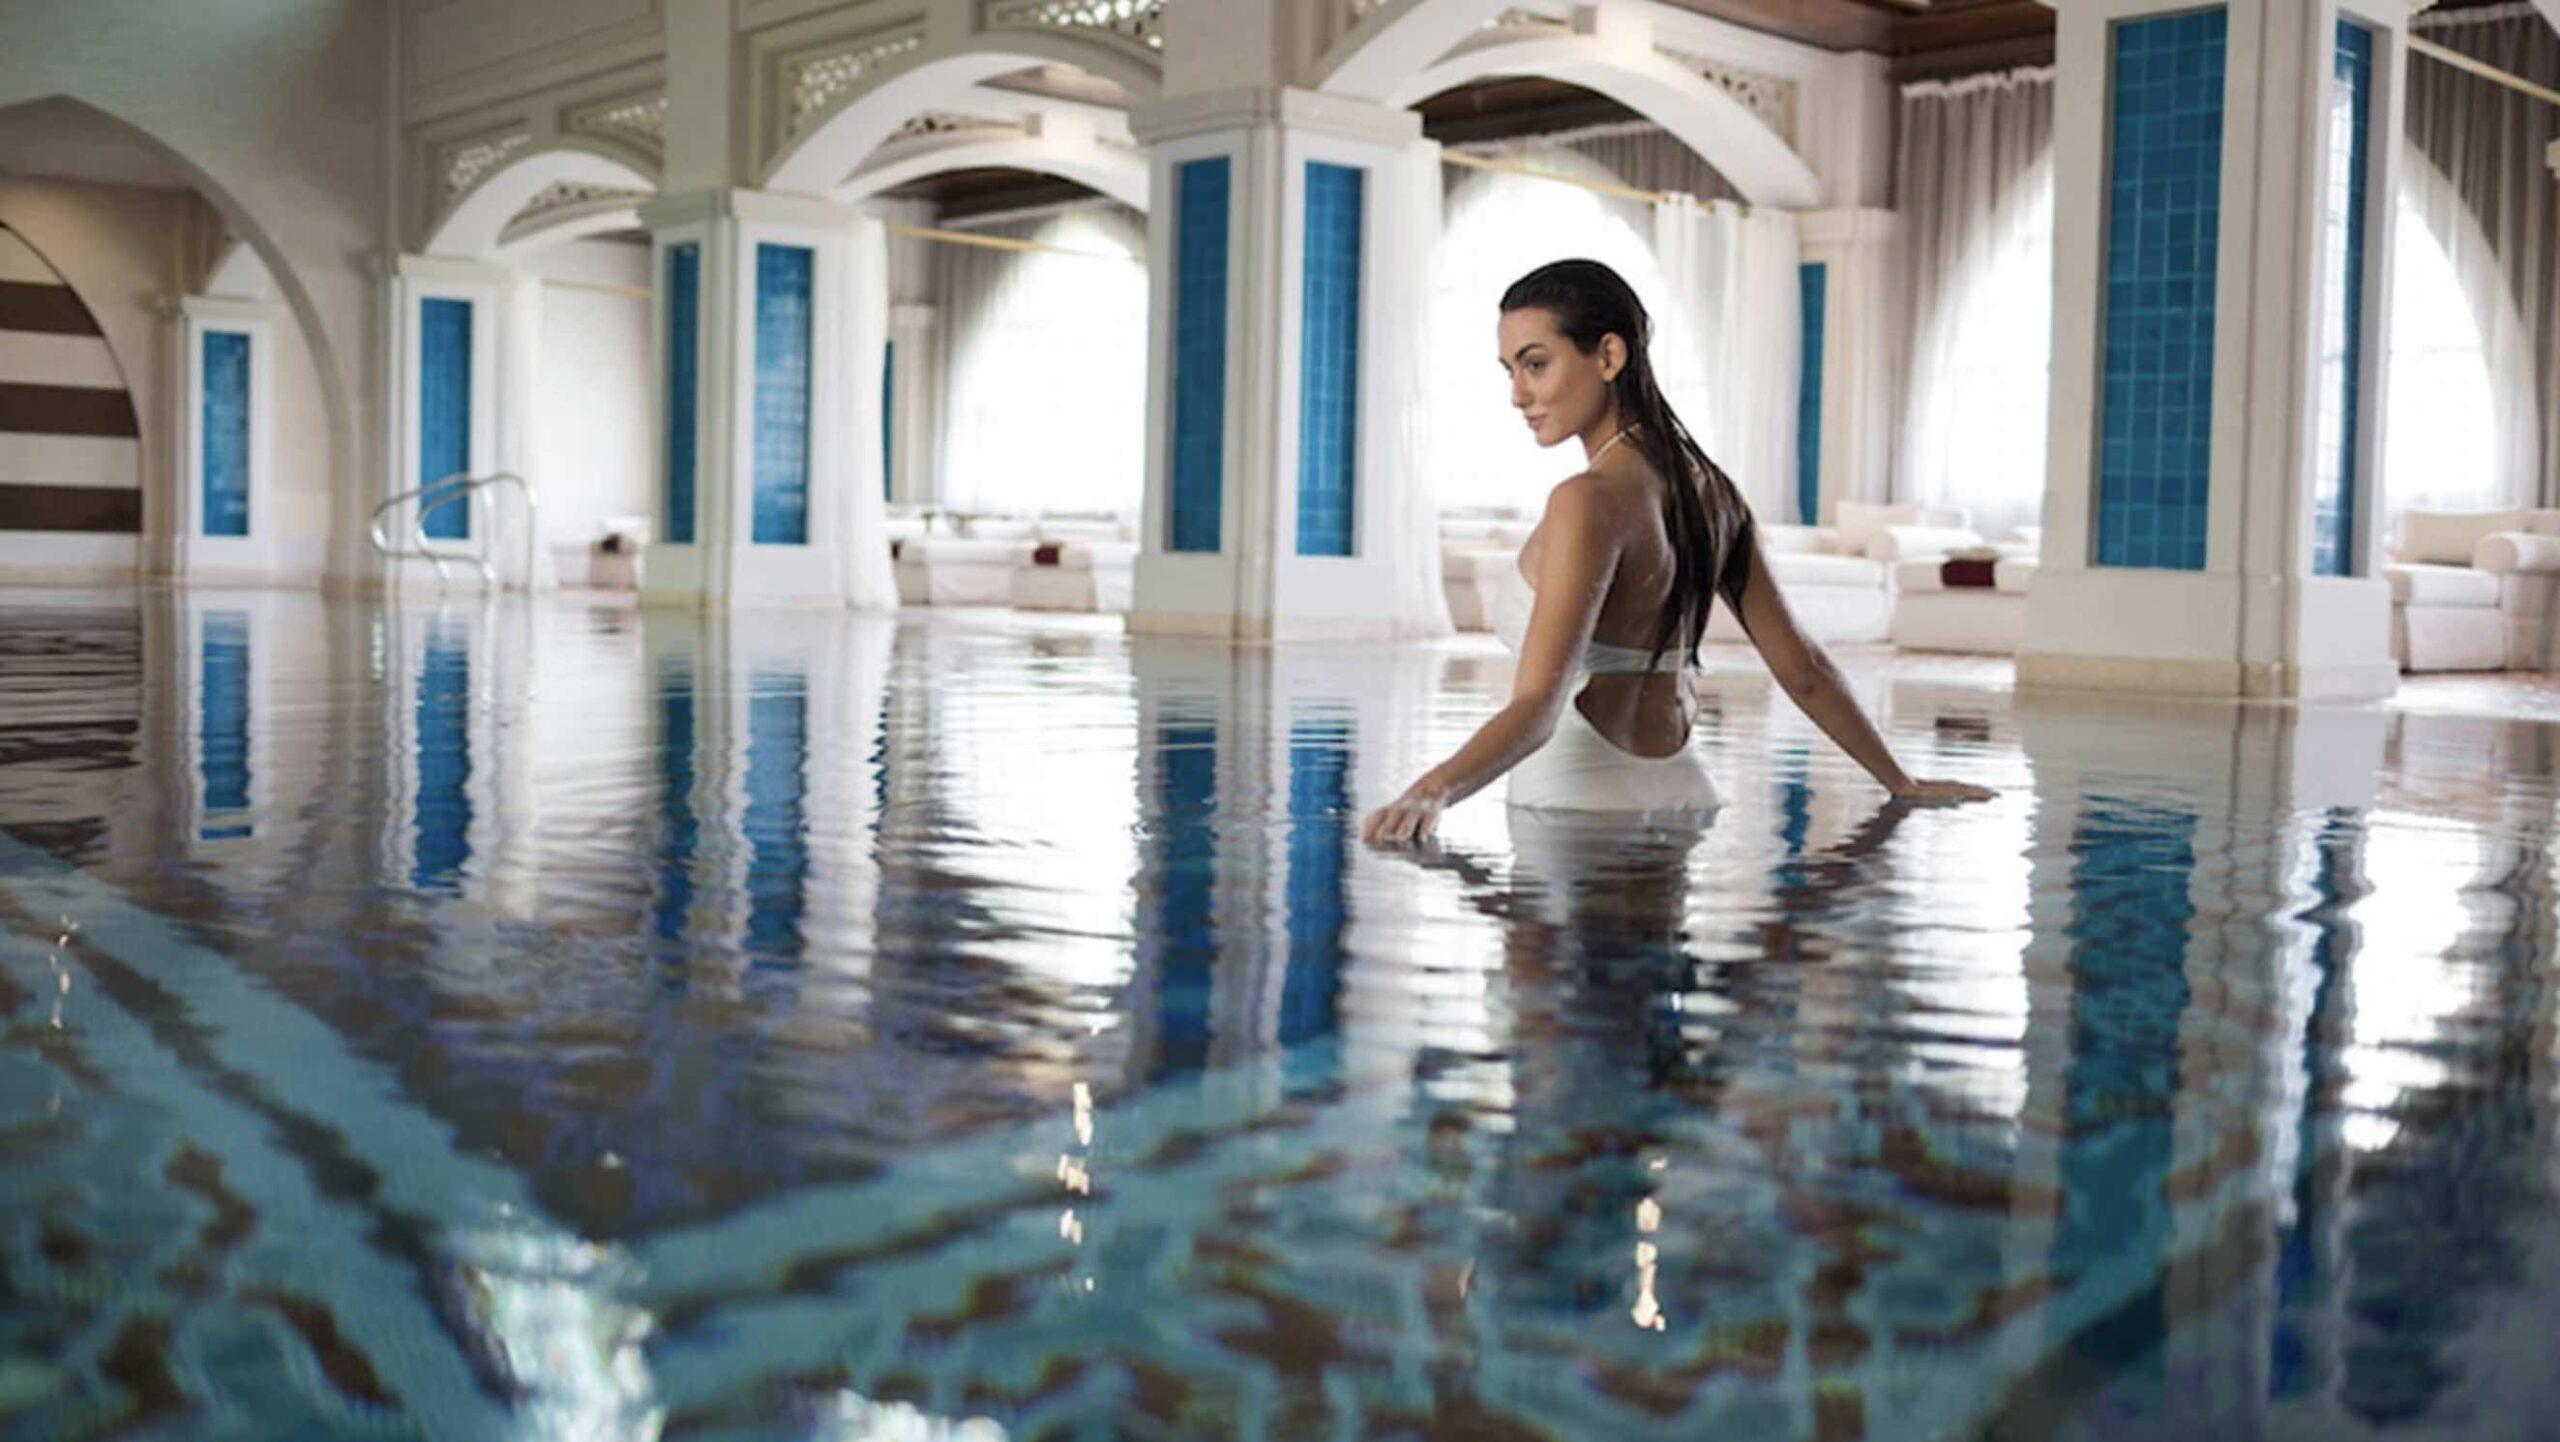 The UAE's best spa and wellness centres – according to you